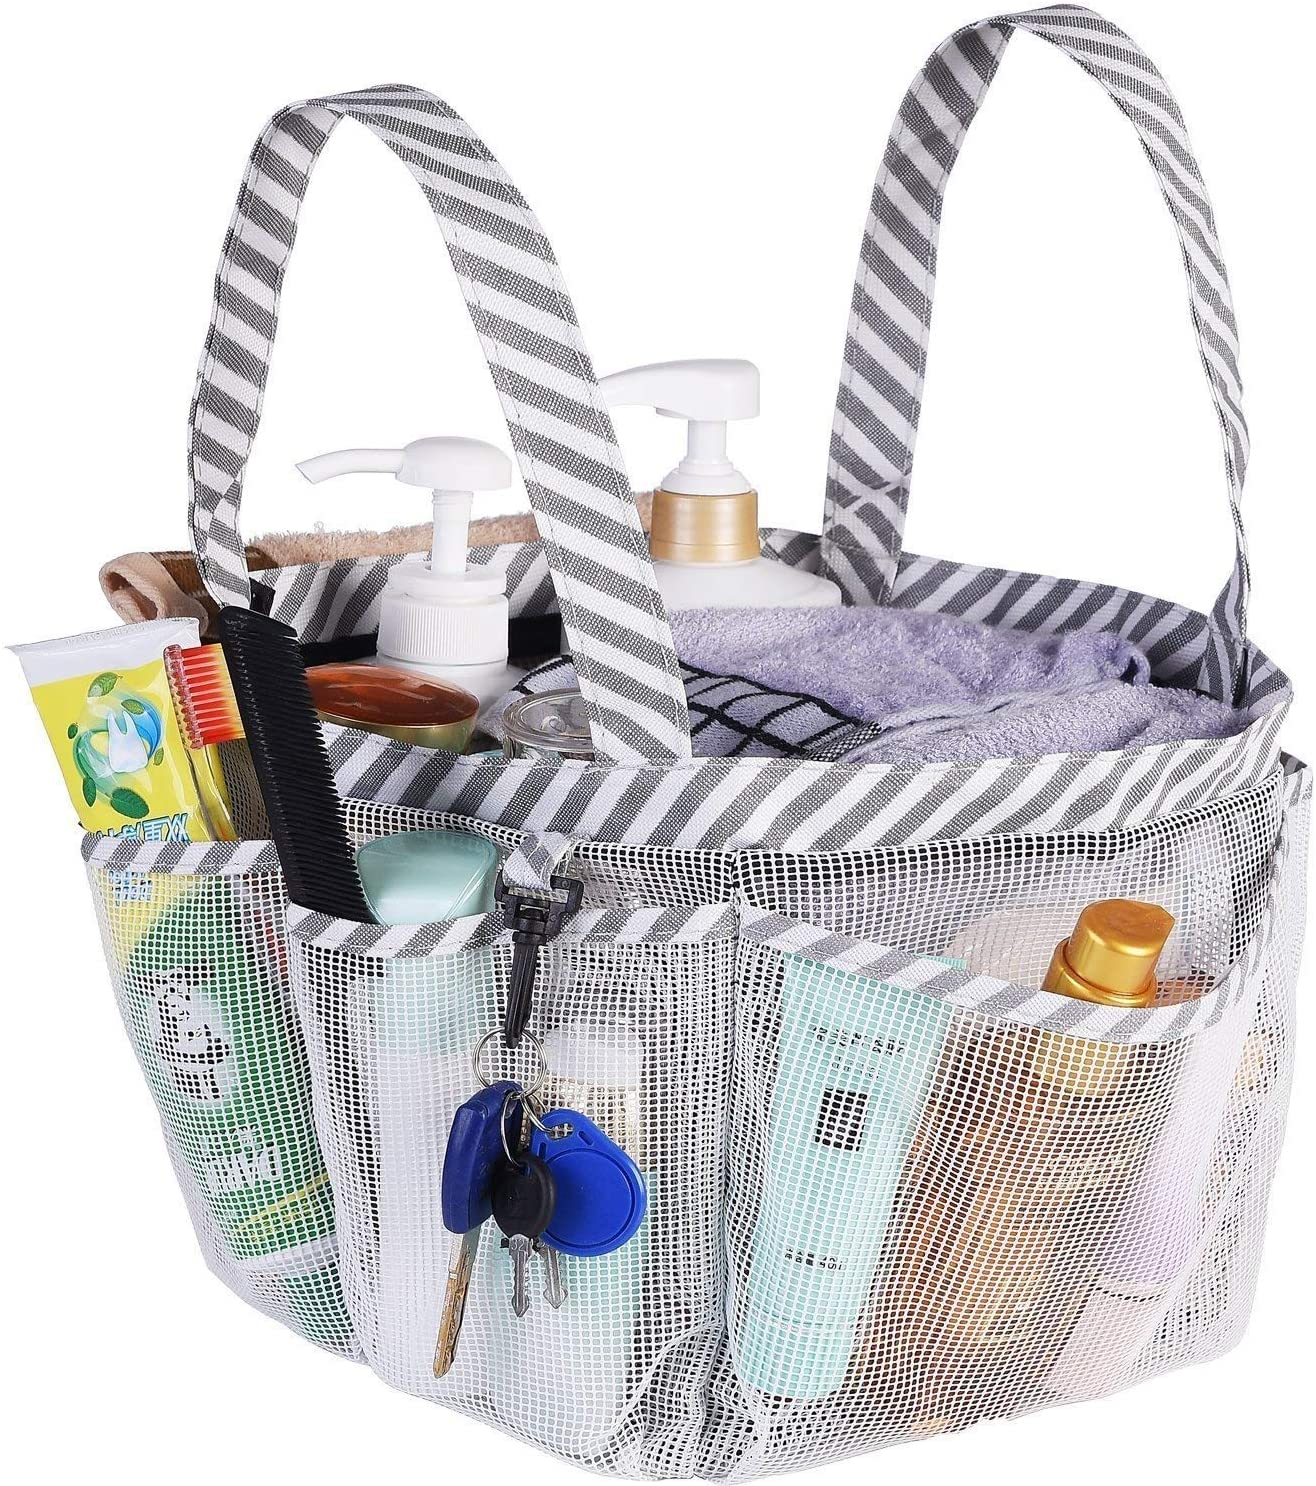 Haundry Mesh Shower Caddy Tote, Large College Dorm Bathroom Caddy Organizer with Key Hook and 2 Oxford Handles - e4cents